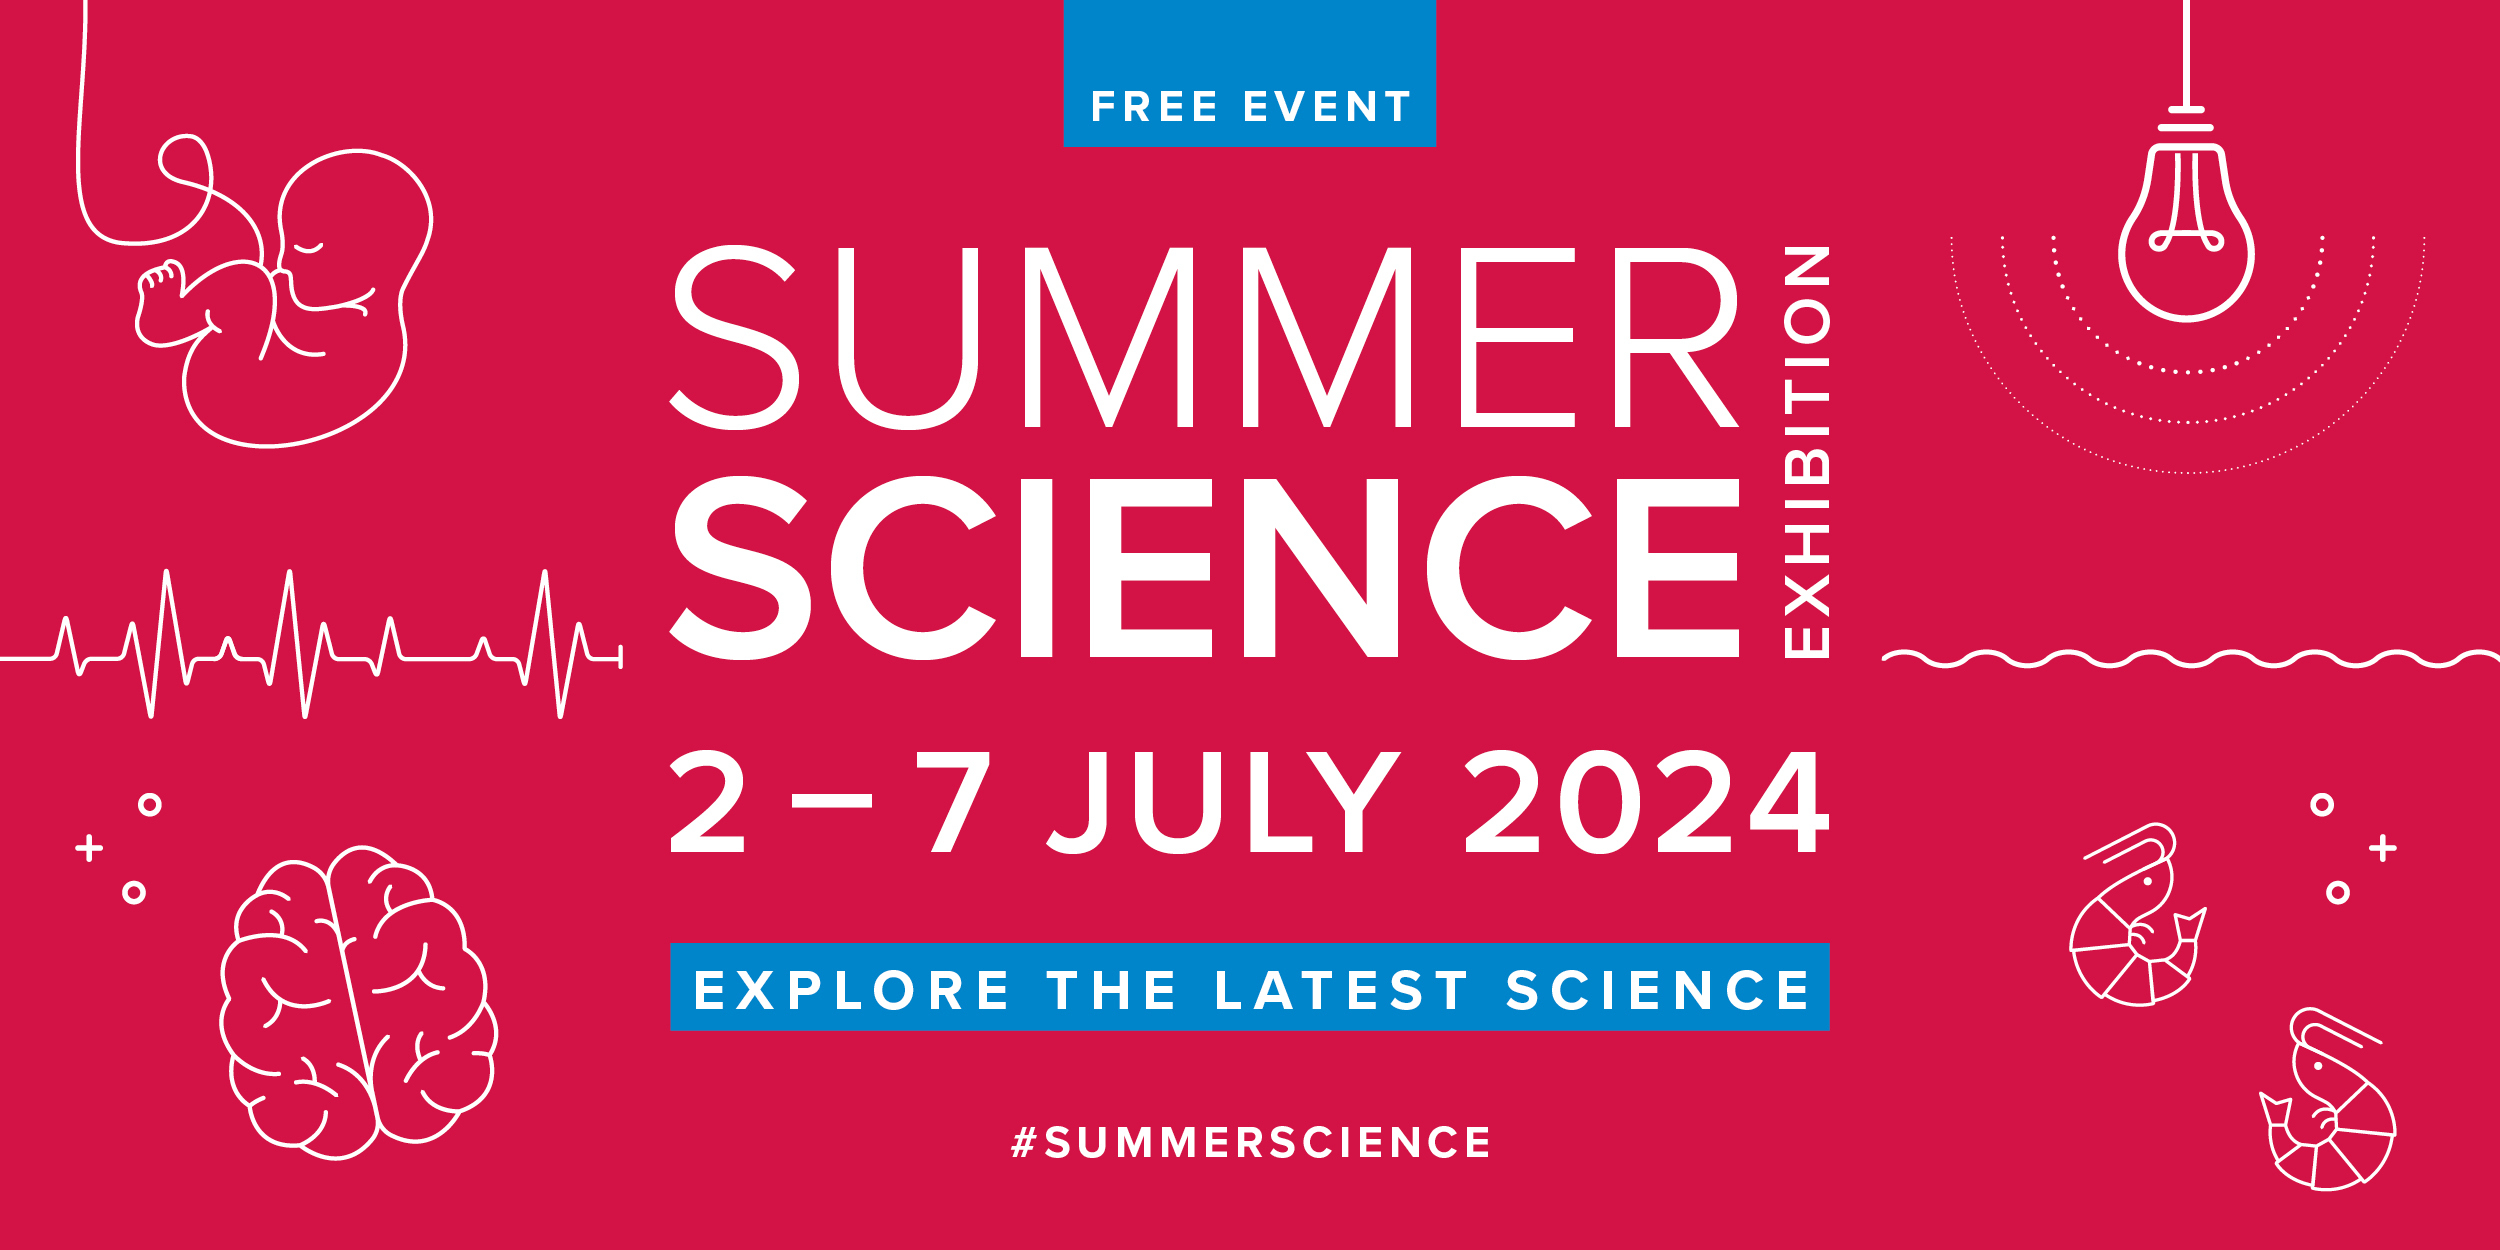 Summer Science Exhibition 2024 in red background with dates 2-7 July 2024